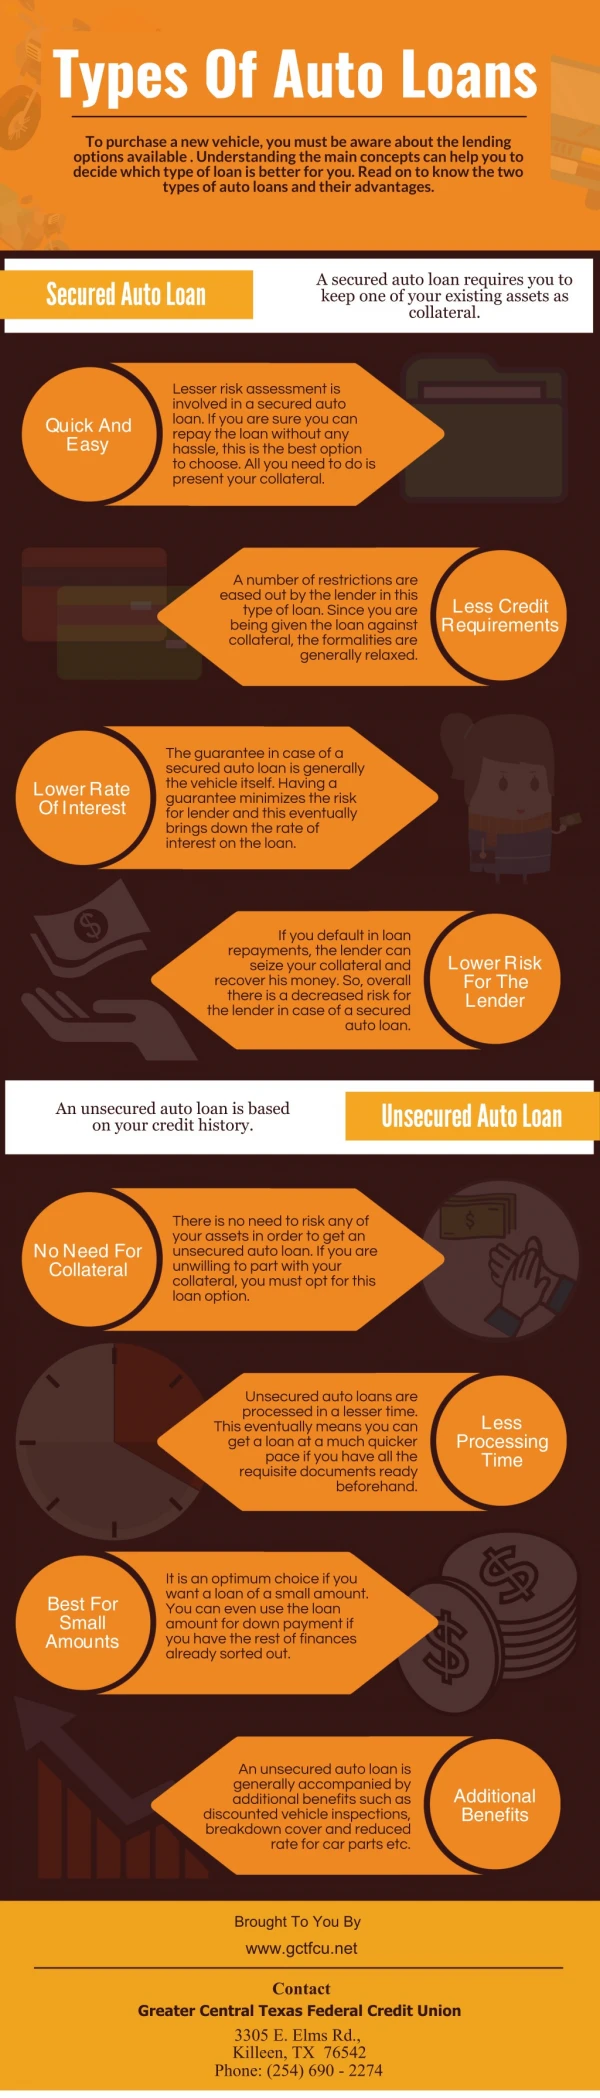 Types Of Auto Loans